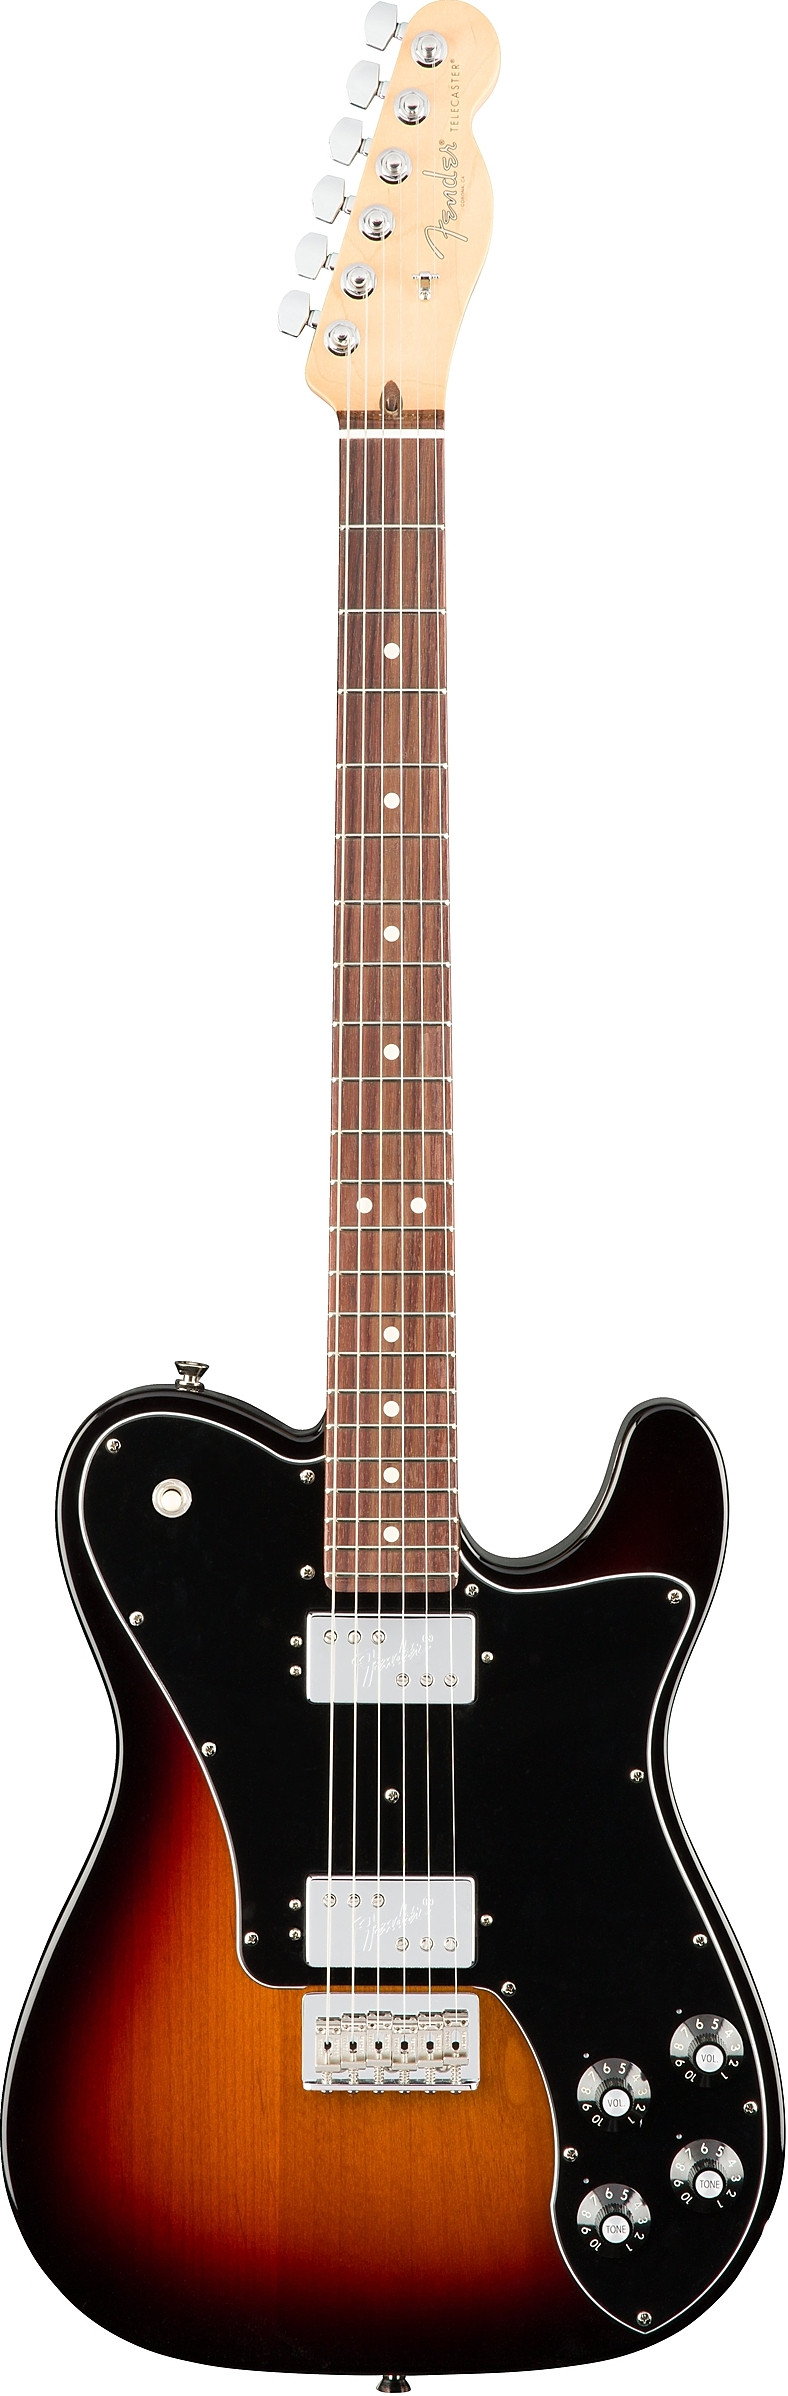 American Professional Telecaster Deluxe Shawbucker by Fender